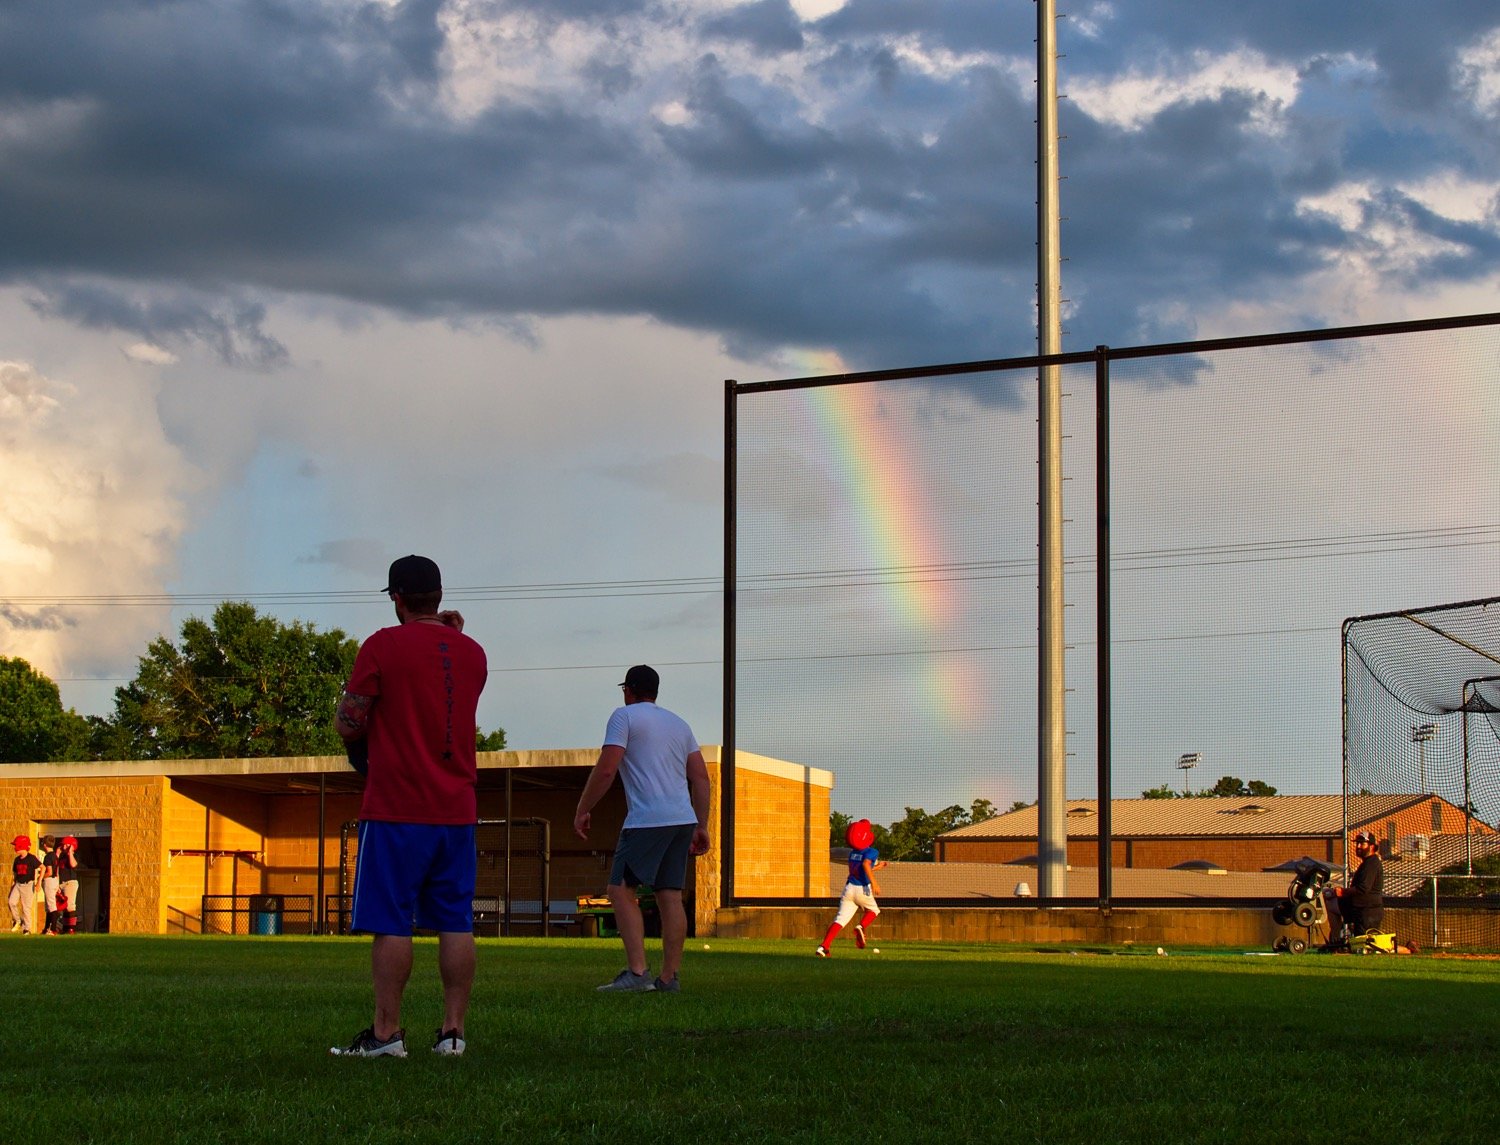 In what could be a sign of better times, Mineola youth begin workouts in preparation for baseball tournaments. Though local youth foundations have canceled the summer season, several traveling and tournament teams are gearing up for activity after youth sports restrictions were lifted June 1.